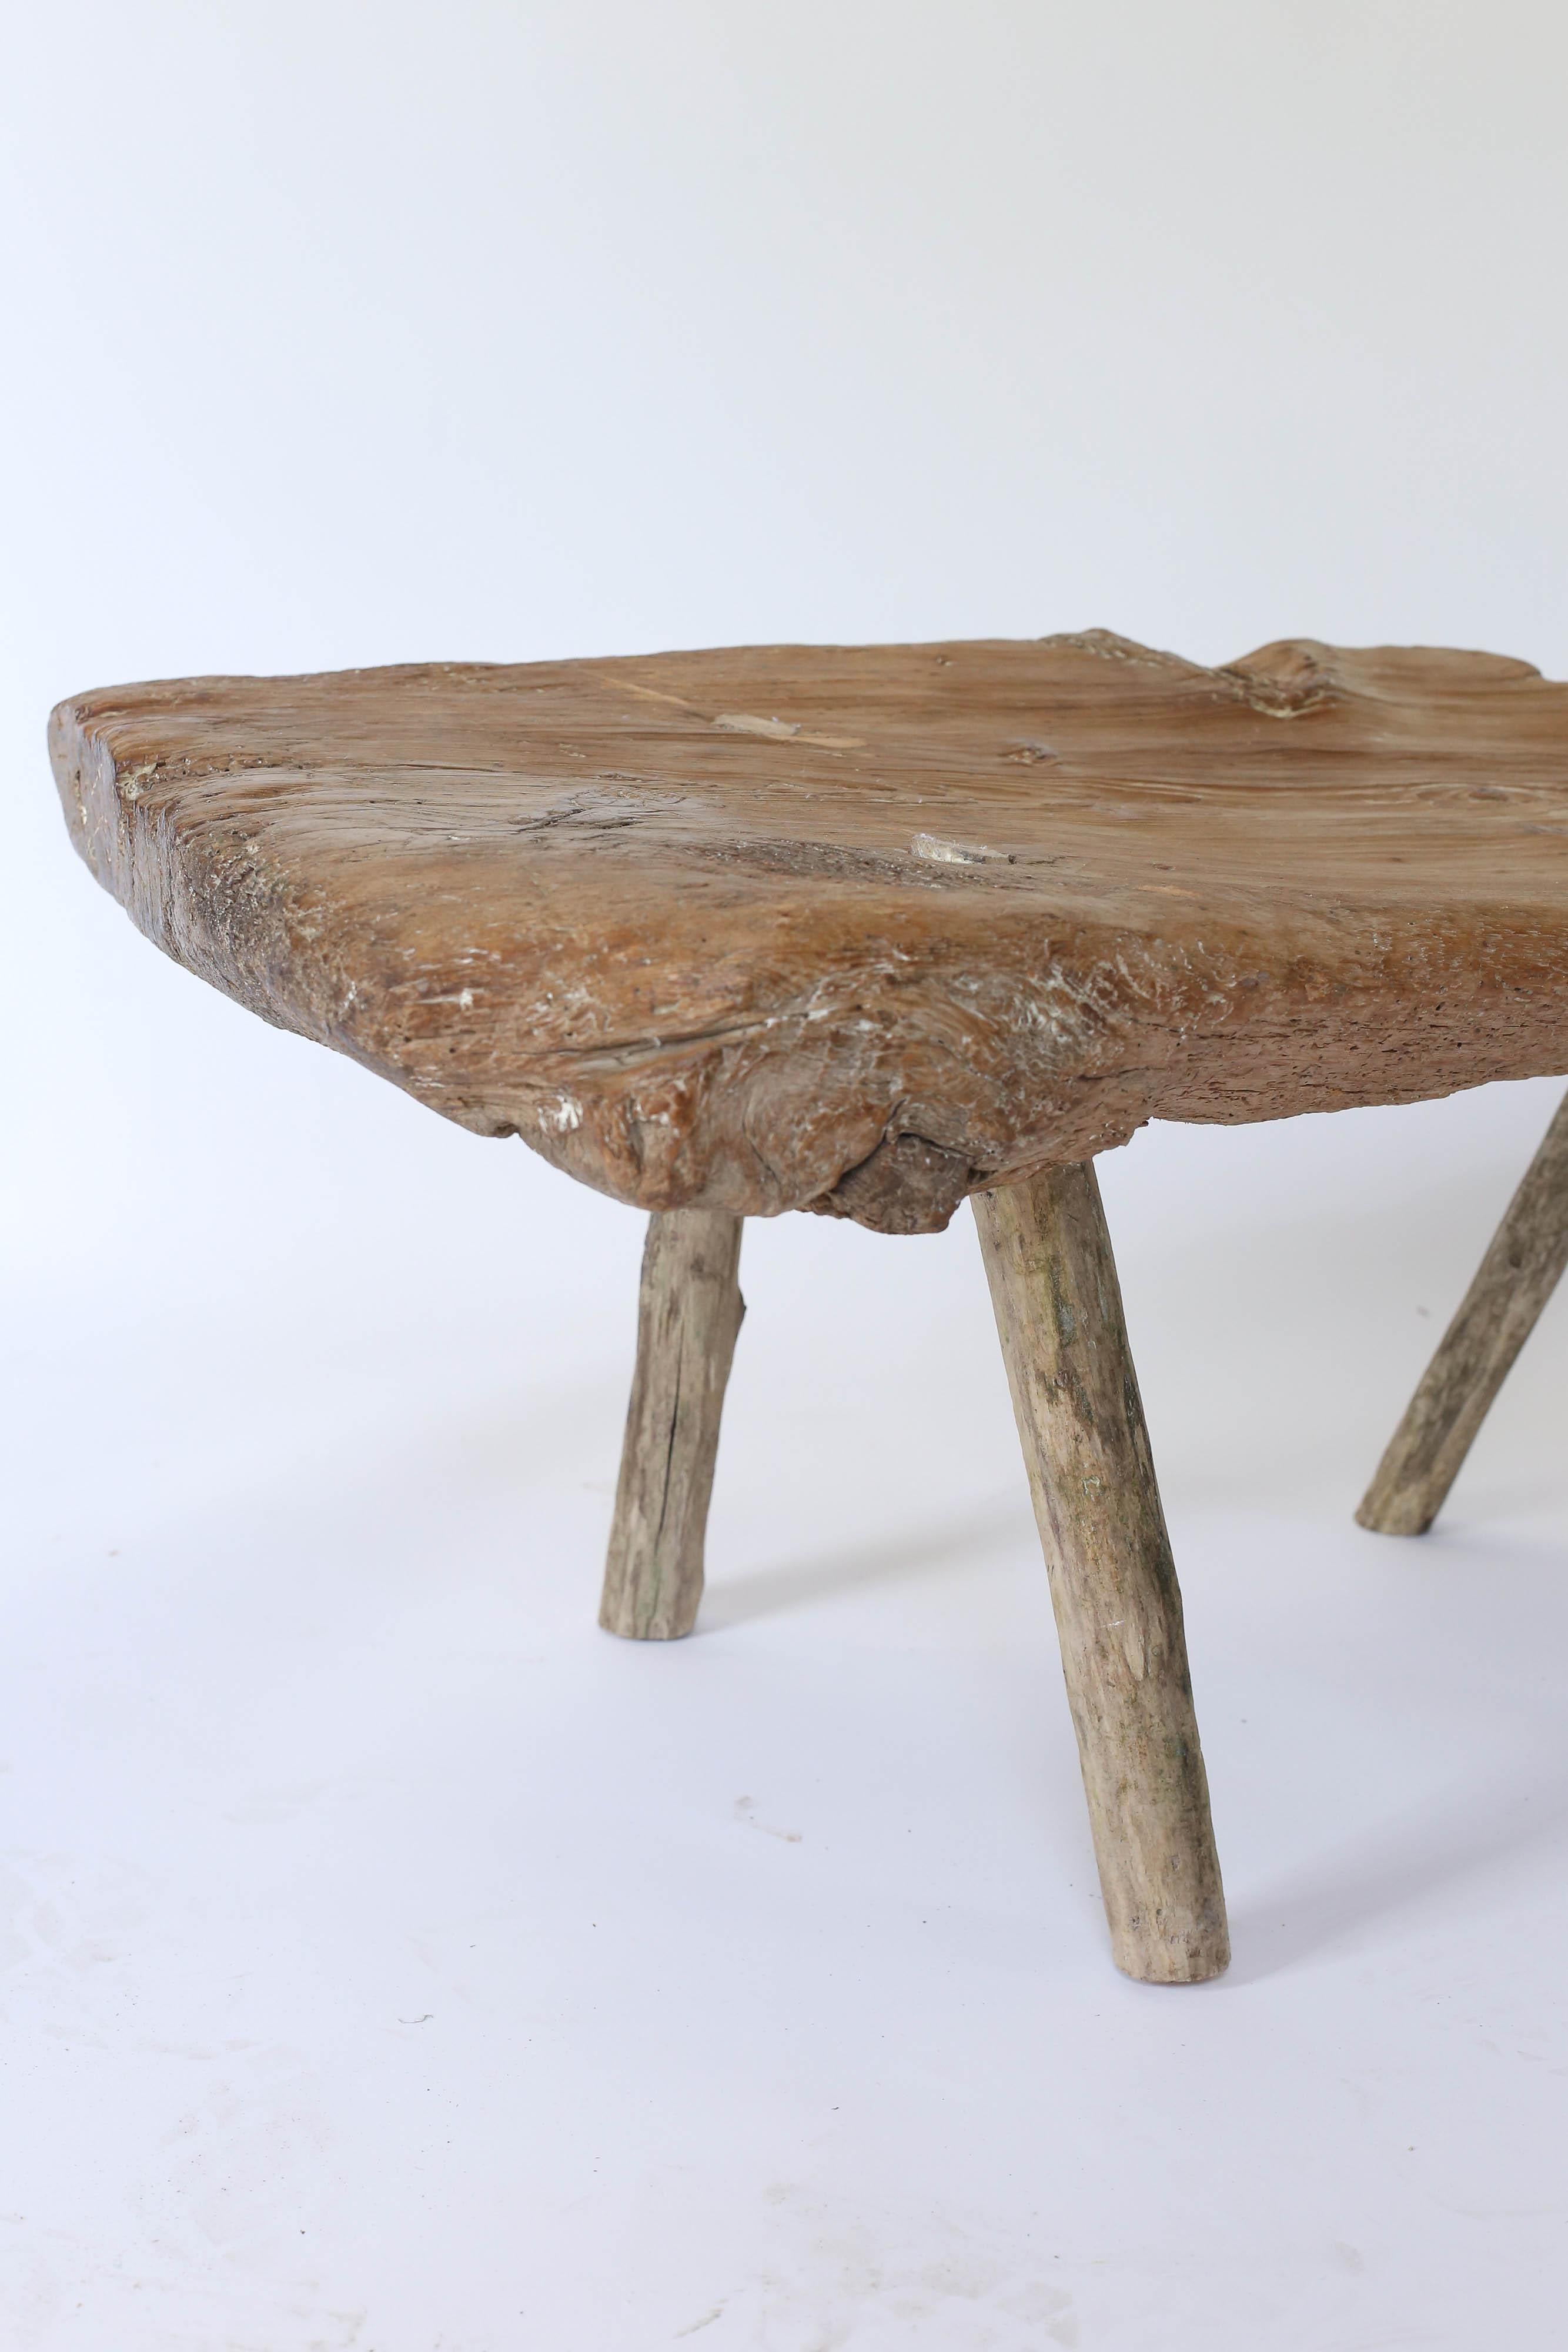 A rustic handmade low table or bench found in France. Heavy and sturdy, a treat for the eye from every angle. Made from one plank of wood the 3 inch top is the focal point with the natural interest of the wood. A warm and interesting piece which